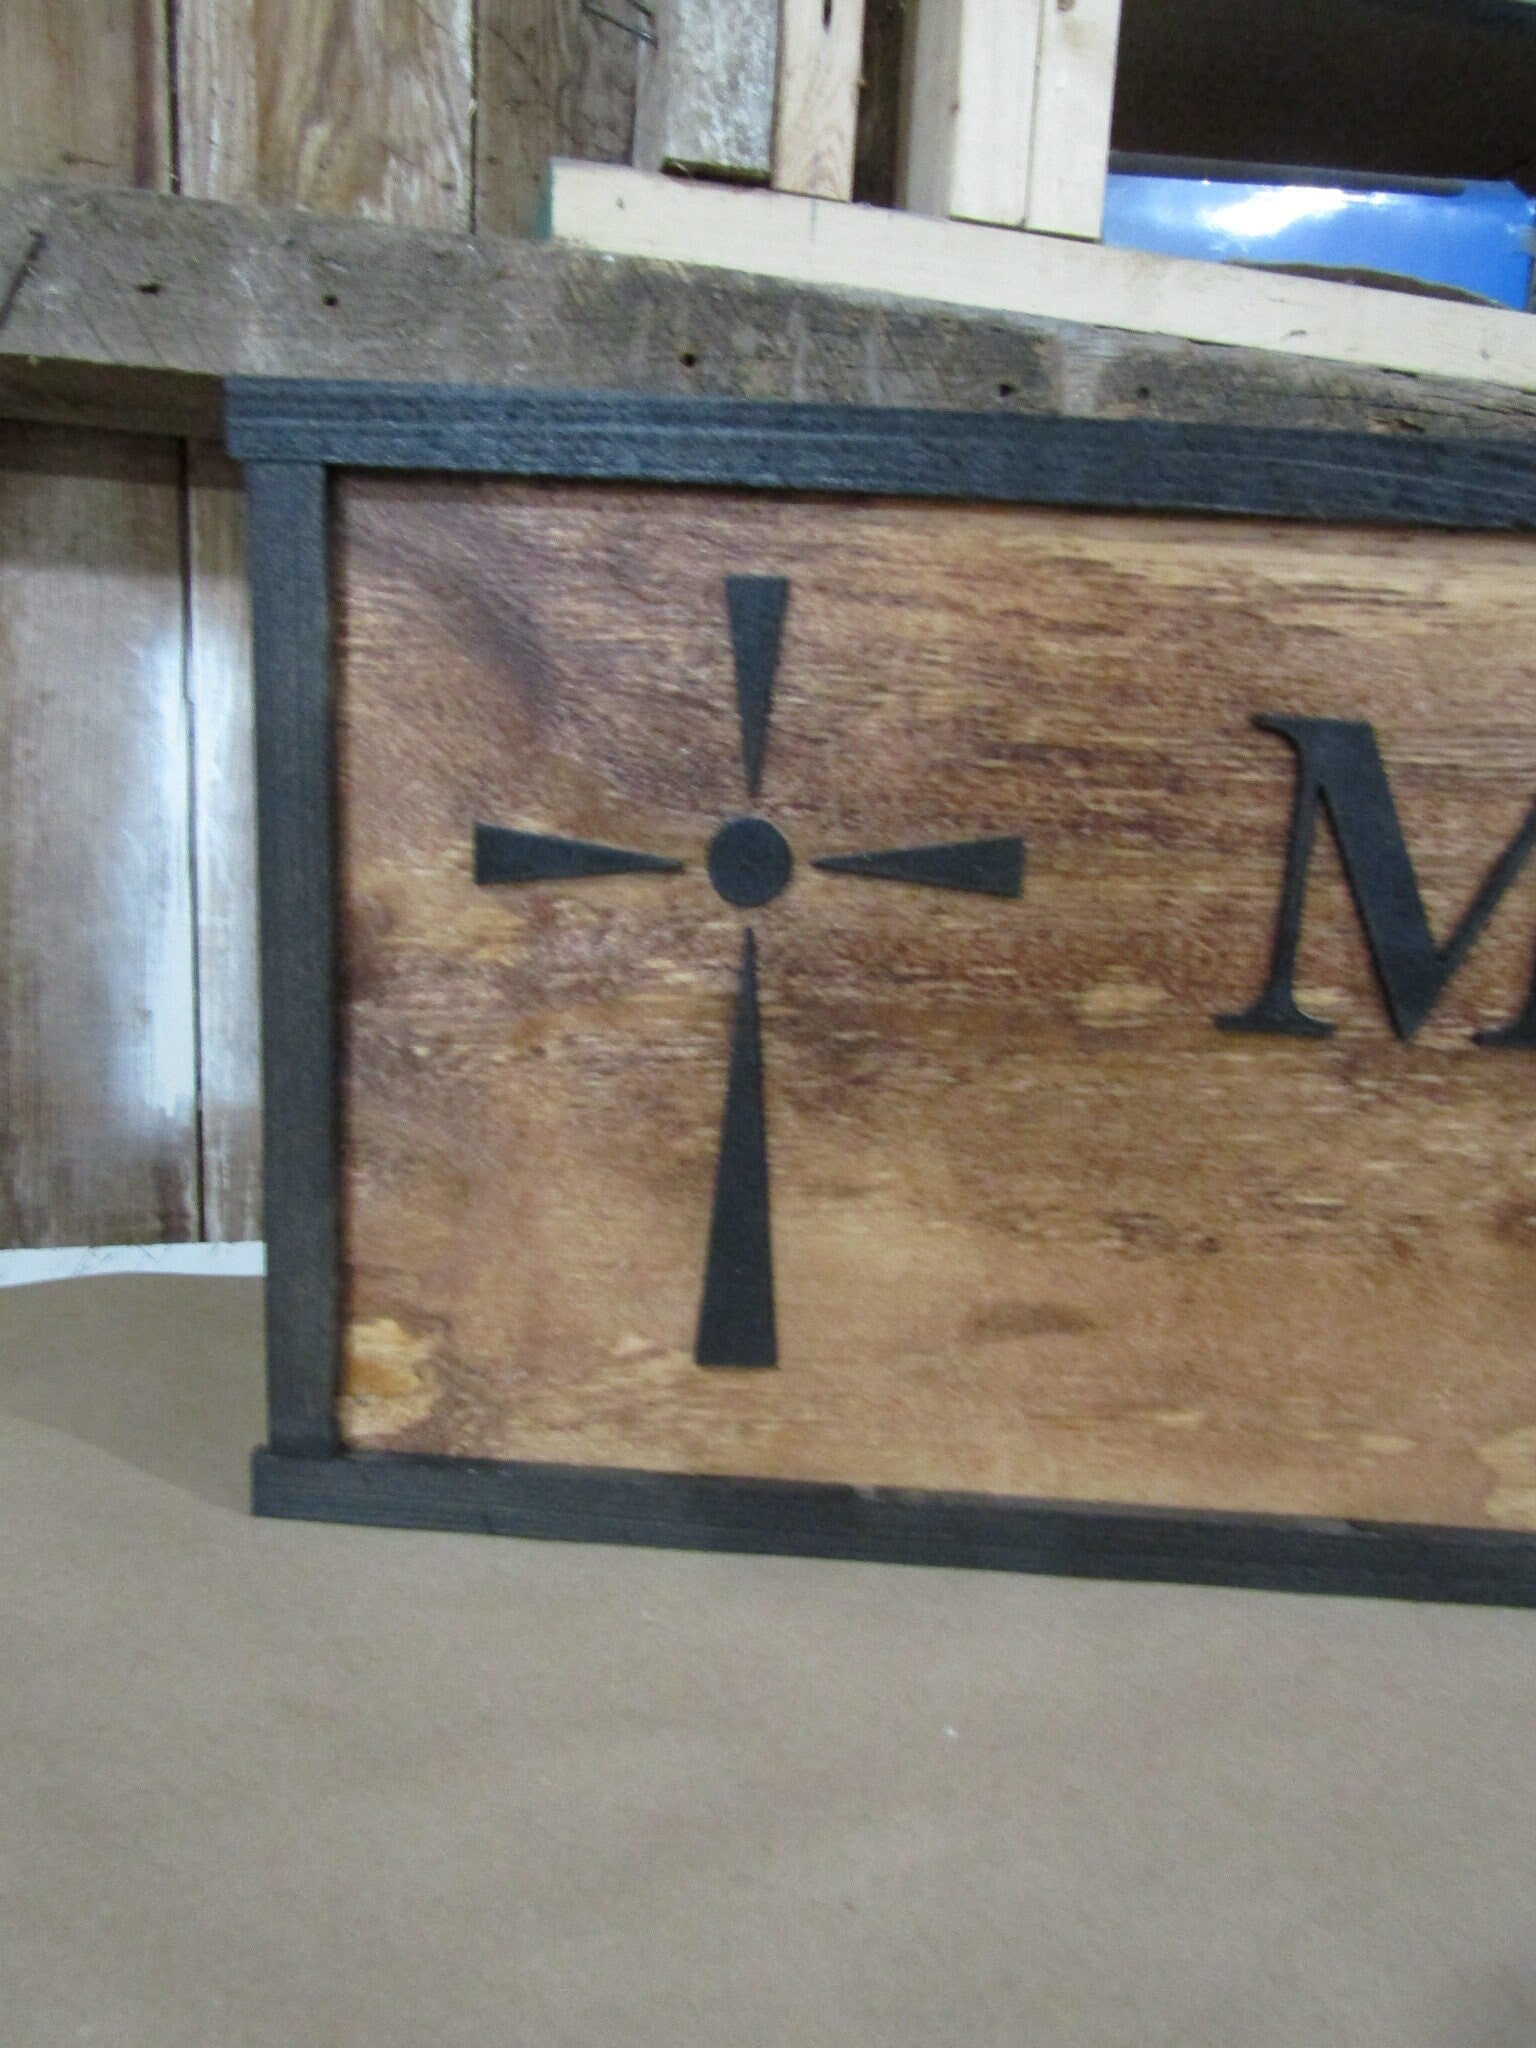 Wooden Personalized Sign Camp Mad Minute Cross Faith Custom Made to Order 3D Signage Entrance Welcome Established Rustic Ranch Style Country